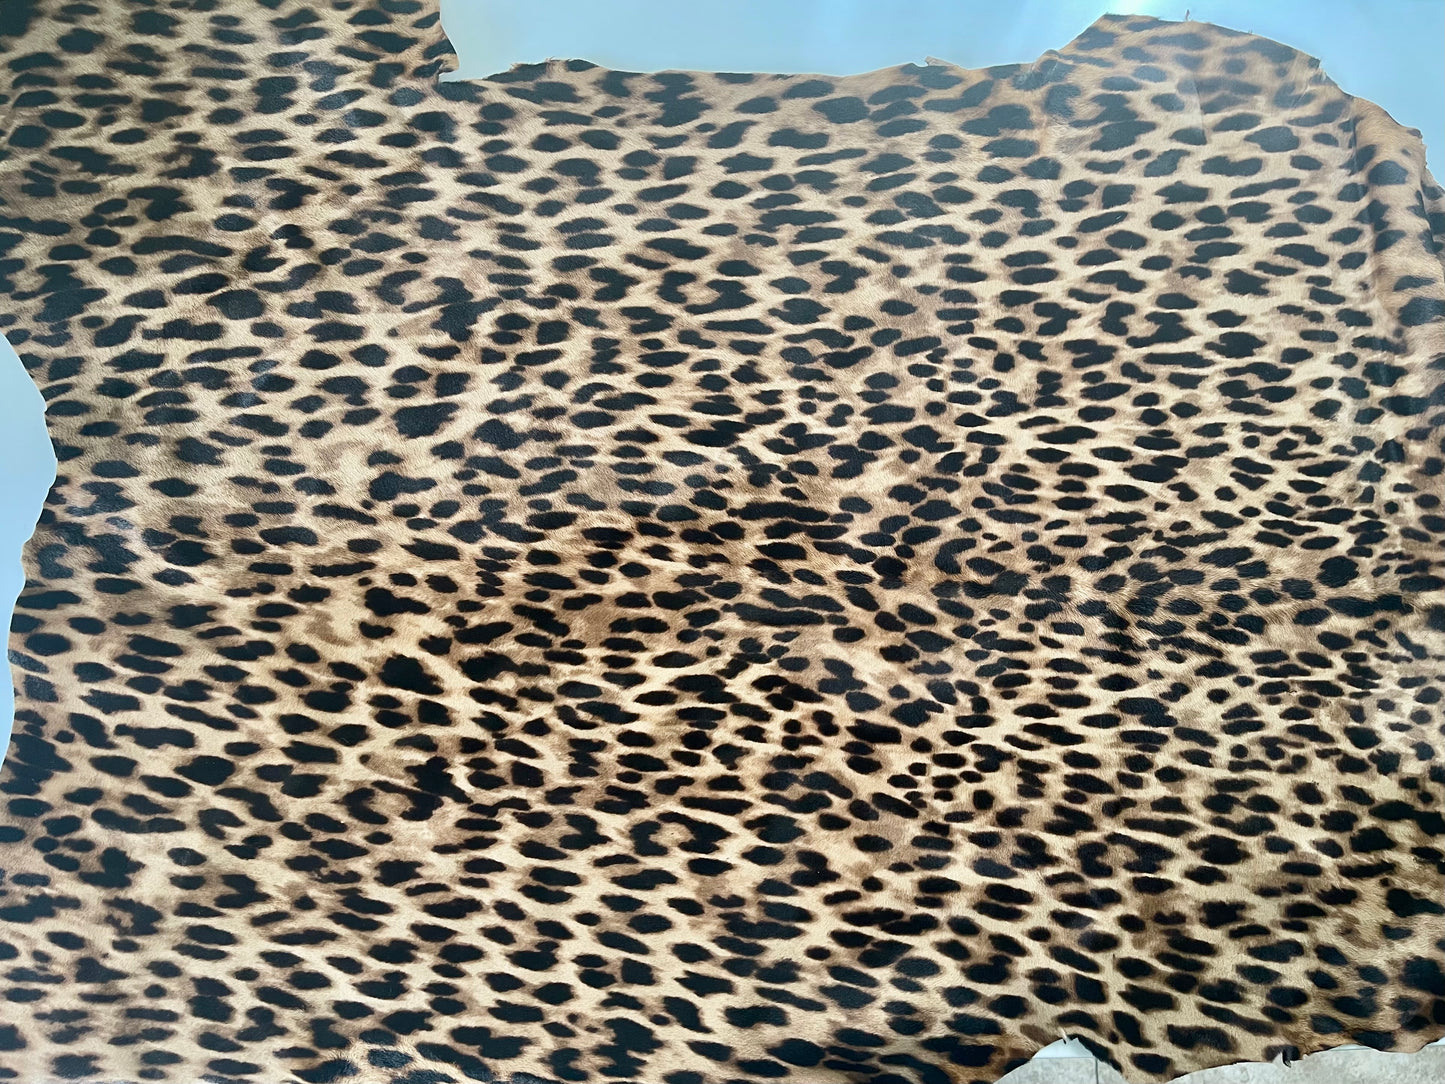 Leopard Hair-On Leather